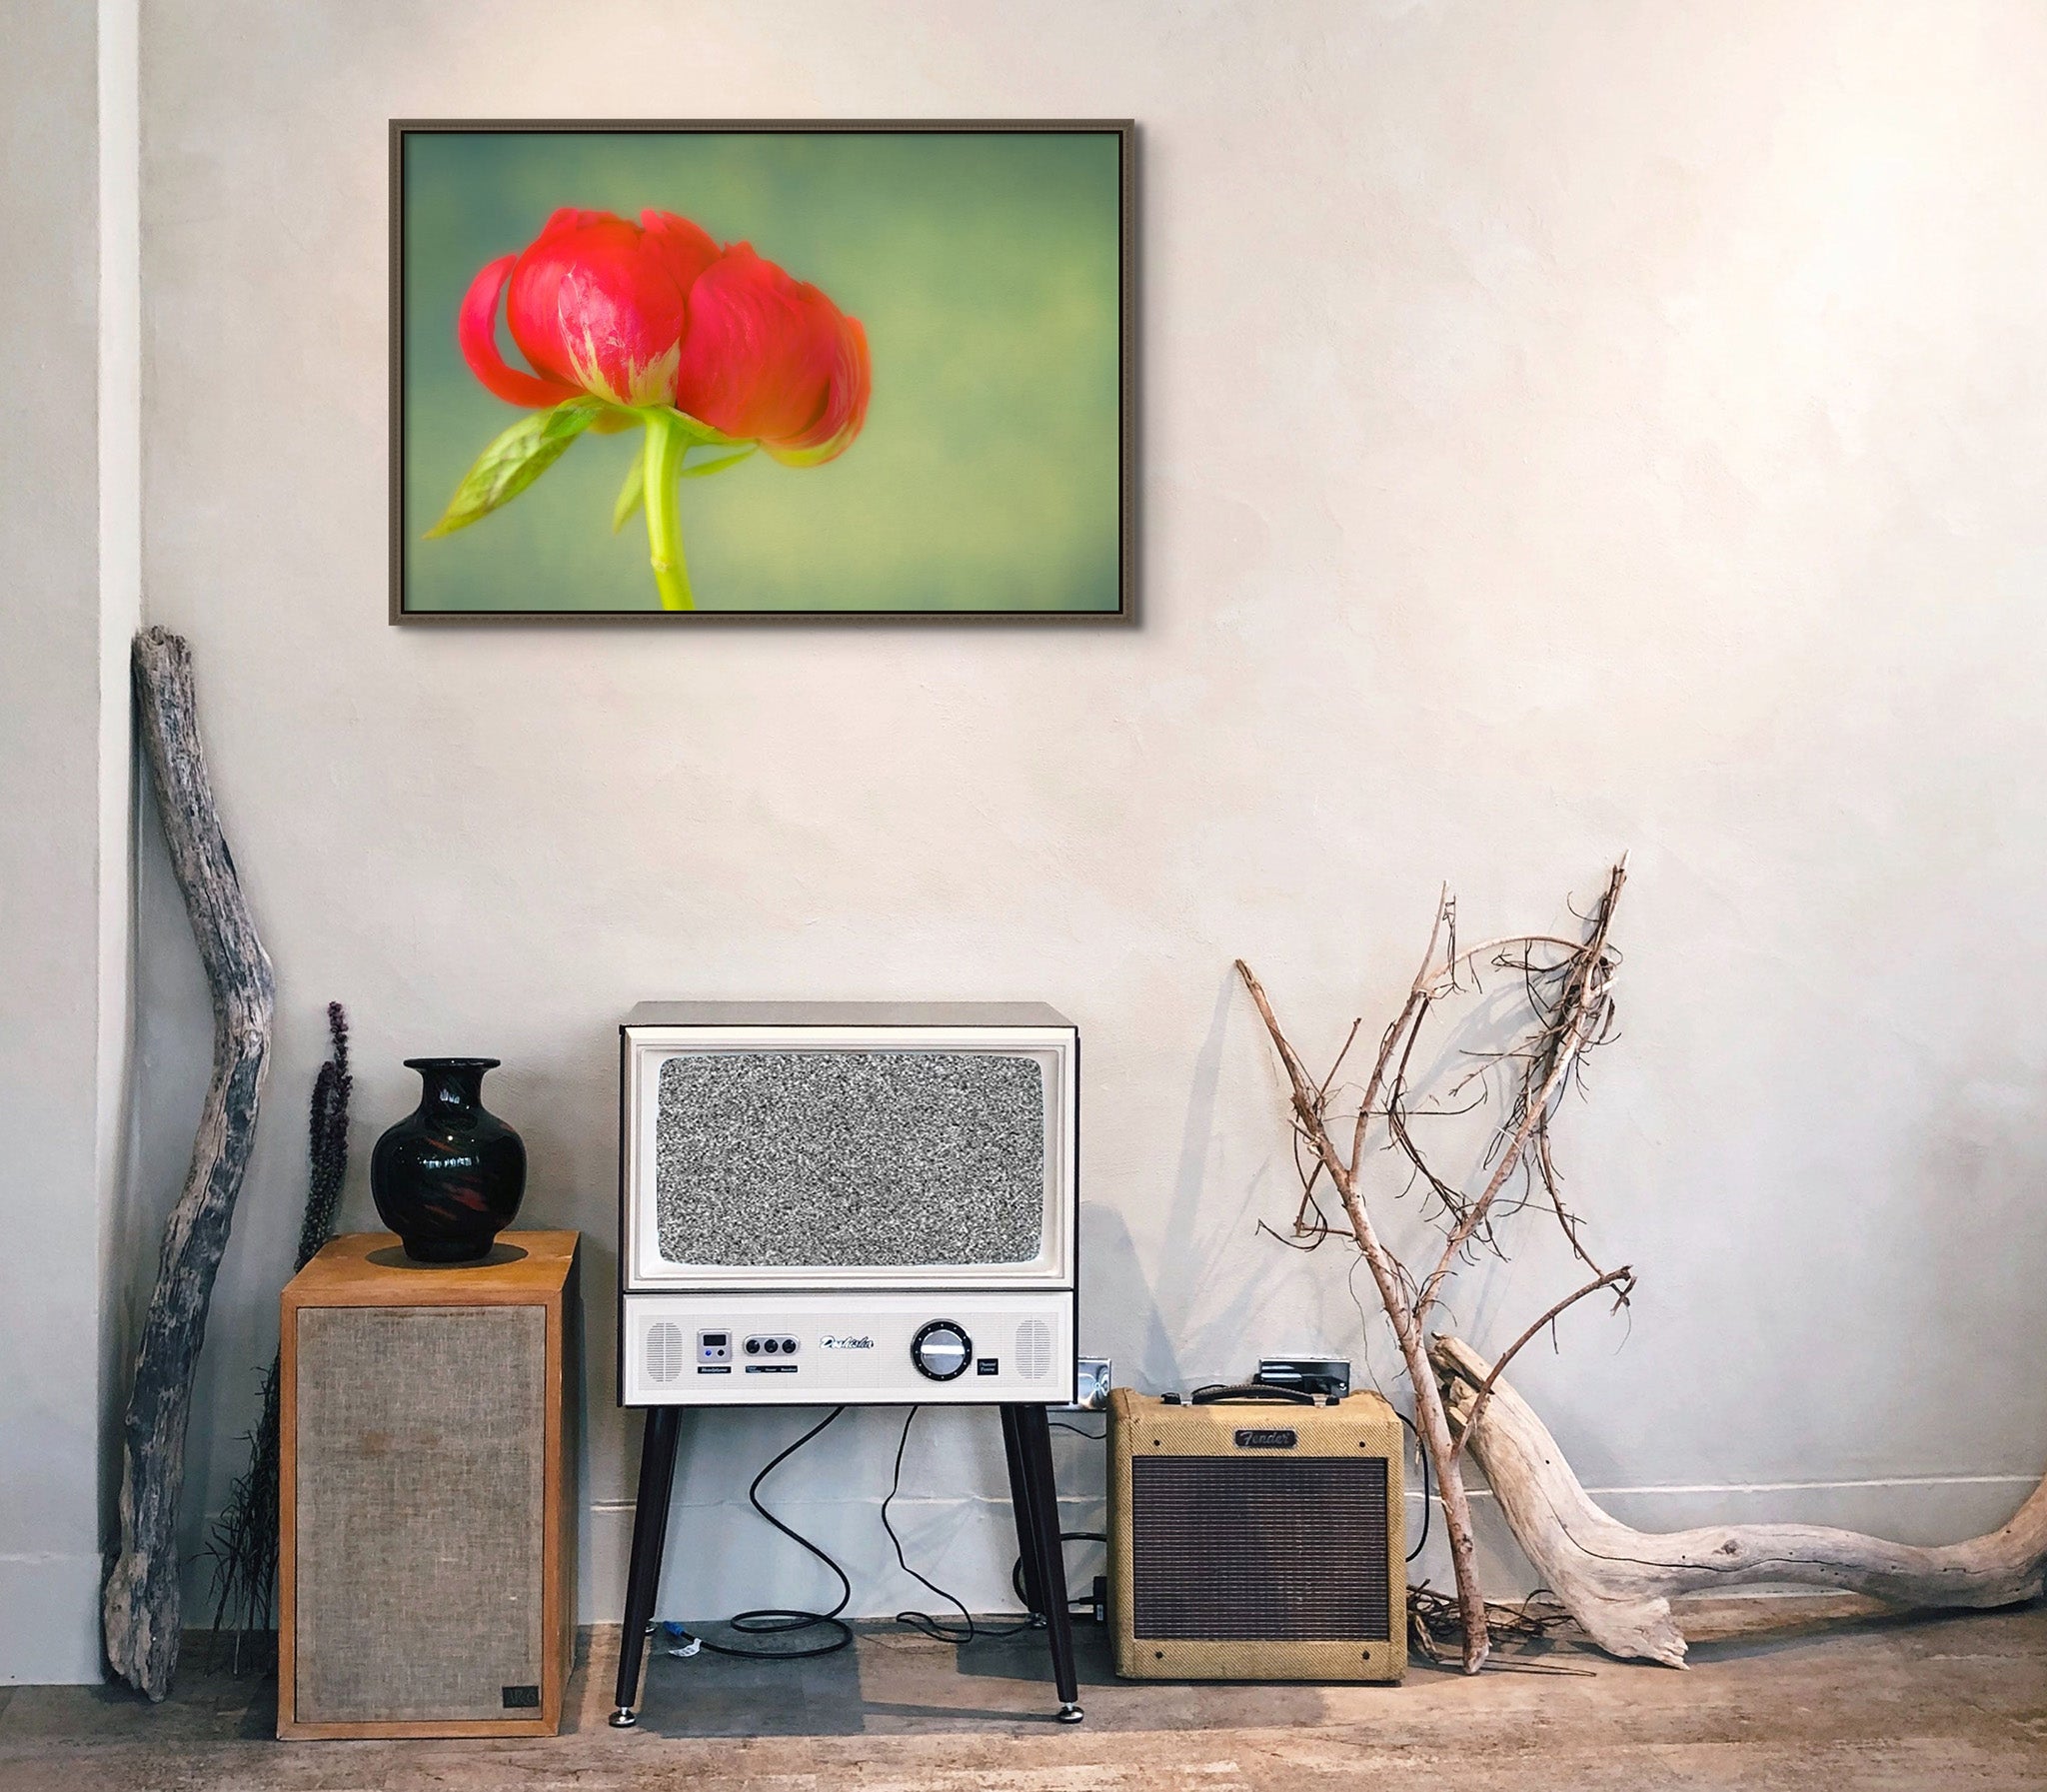 Picture hanging on a wall in a room with an old tv and other miscellaneous objects in the corner of the room. The picture on the wall is a flower photograph of a Red Peony on green background by Cameron Dreaux. 